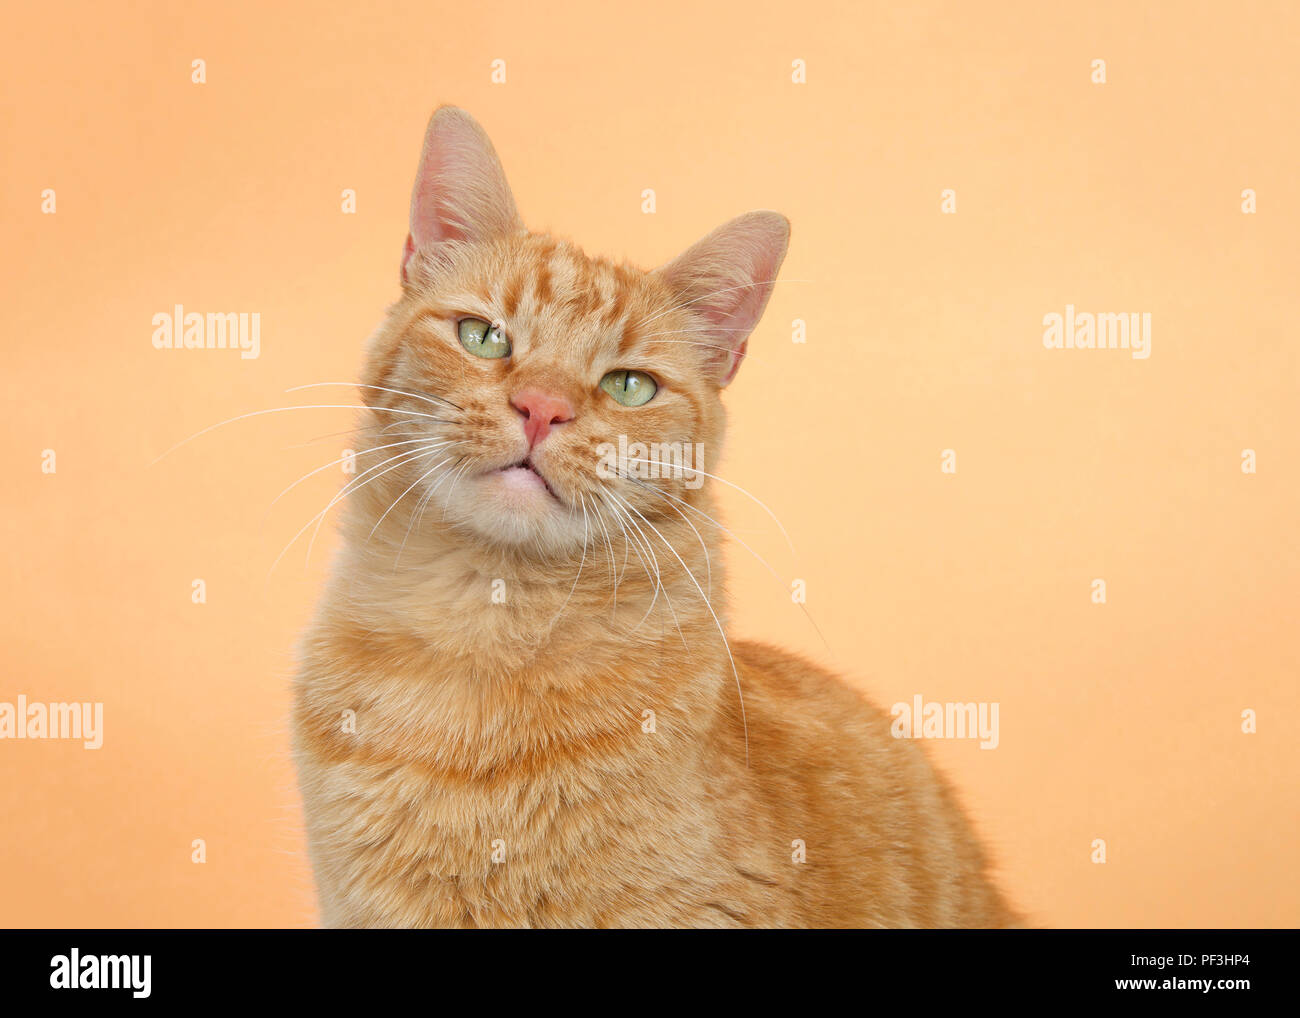 Portrait of one orange tabby ginger cat on an orange background. Looking directly at viewer with perturbed unbelieving expression, head tilted to side Stock Photo